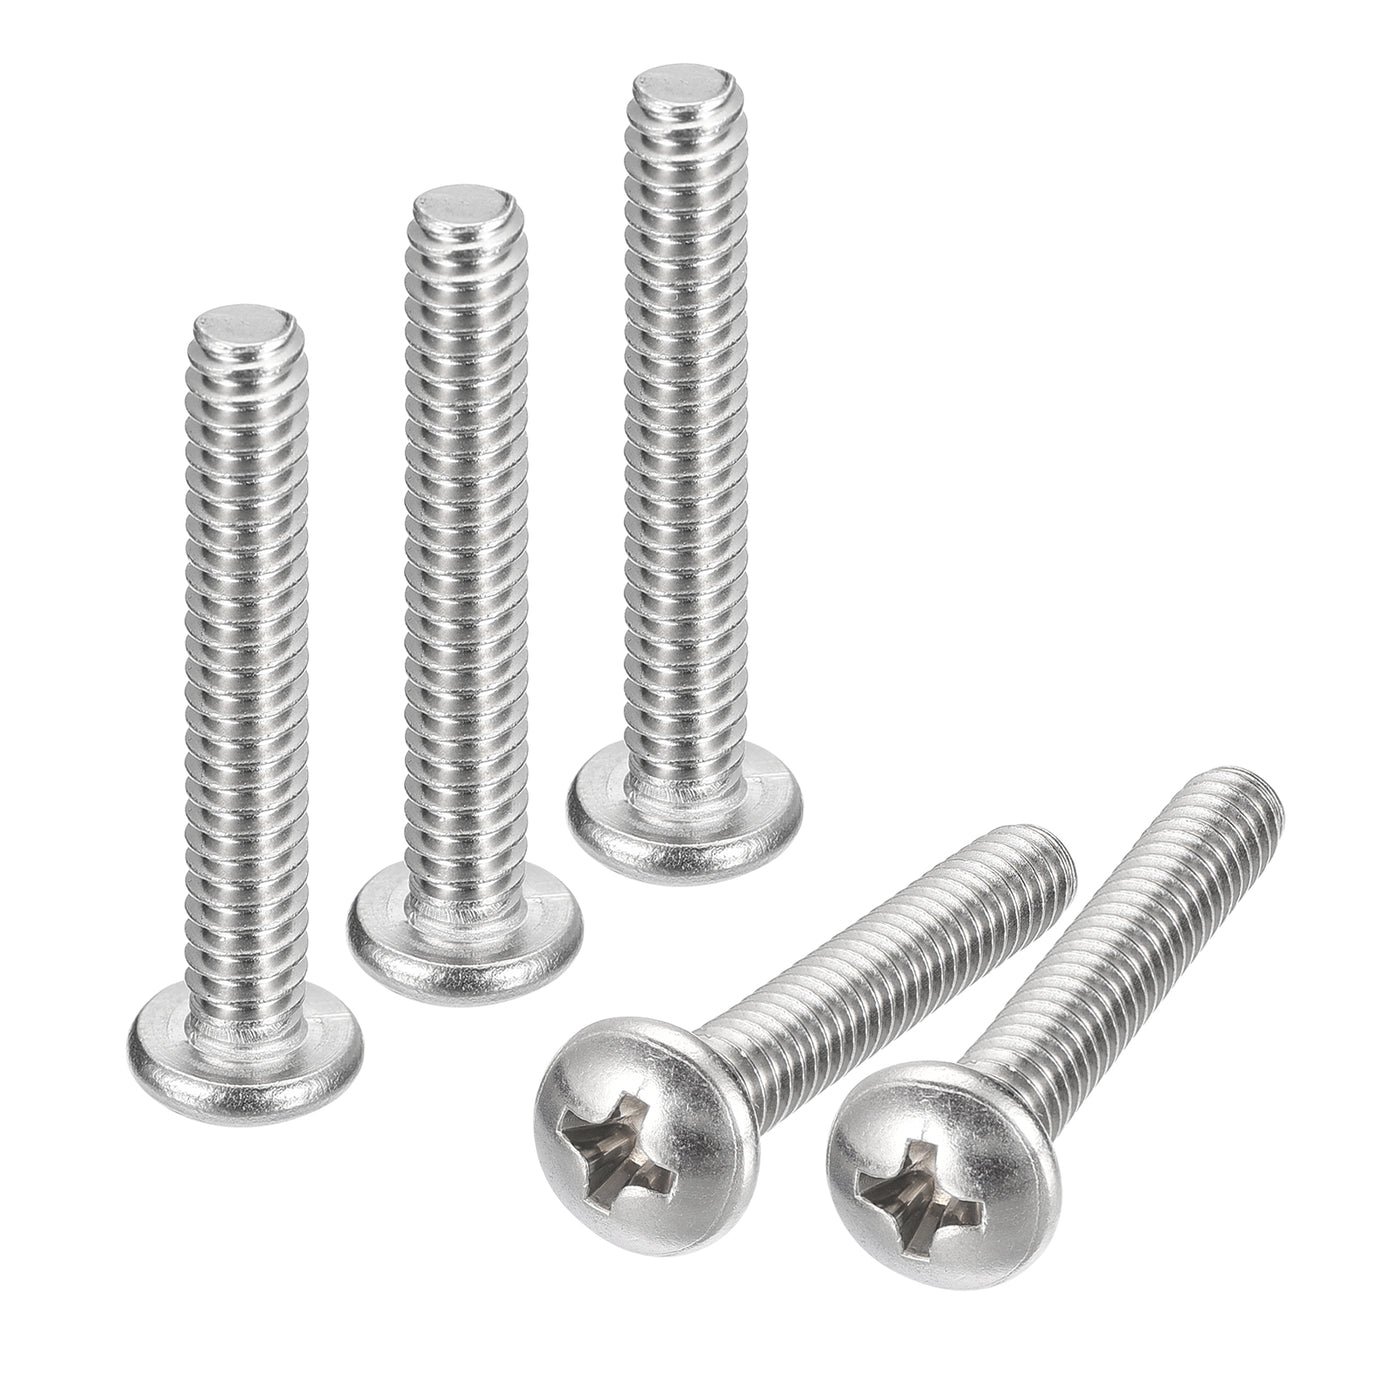 uxcell Uxcell #10-24x1-1/4" Pan Head Machine Screws, Stainless Steel 18-8 Screw, Pack of 20